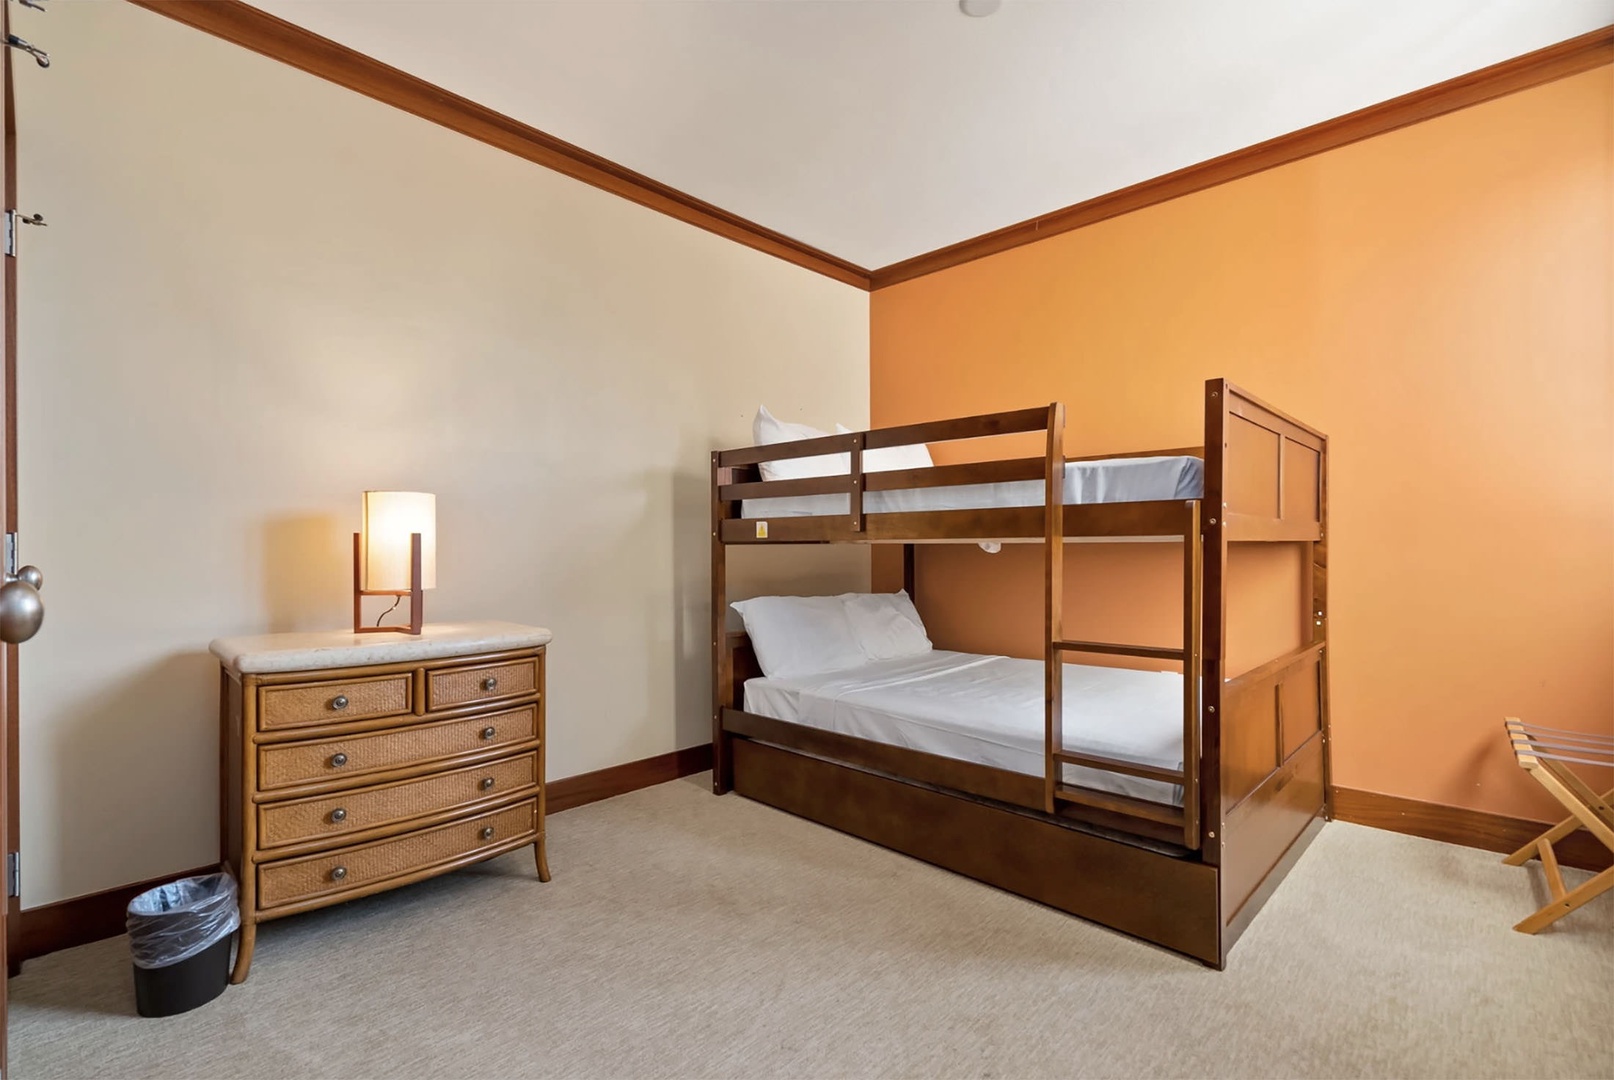 Bedroom 3 features a bunk bed